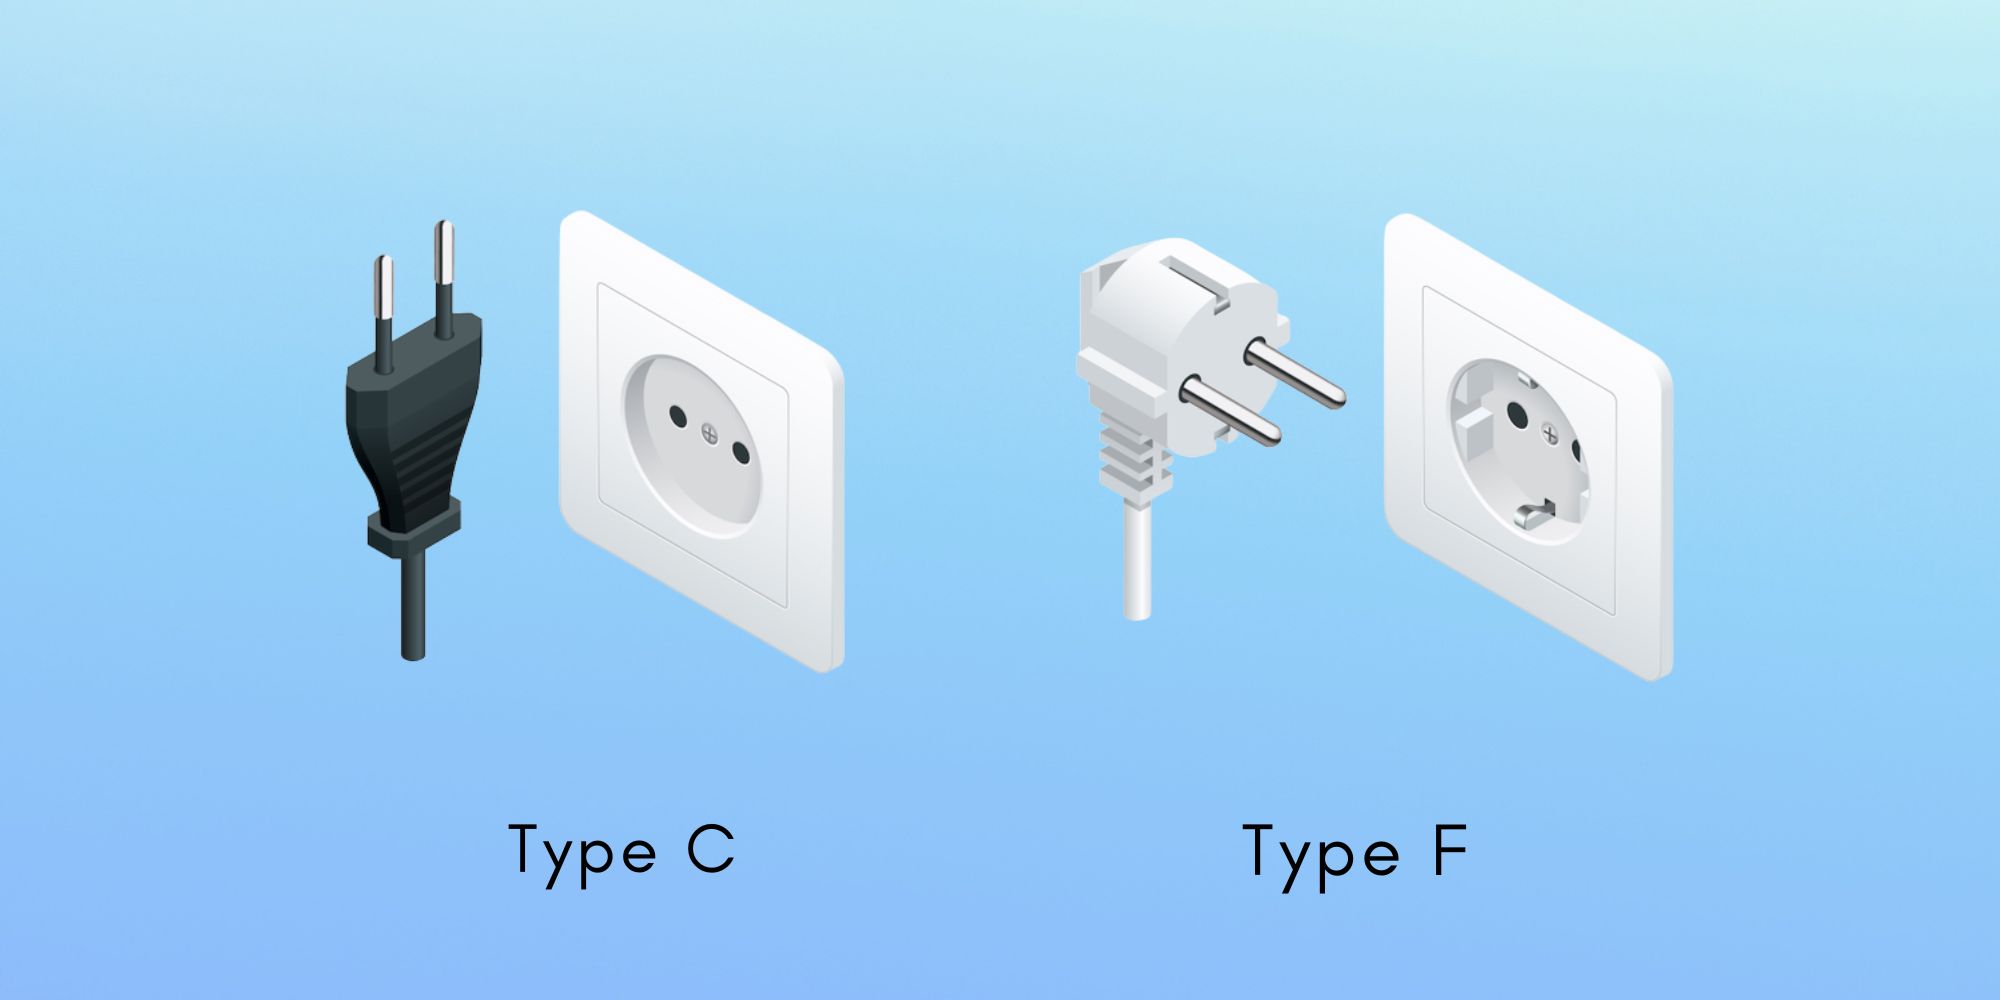 Finland Power Plugs and Sockets: Type C and Type F
